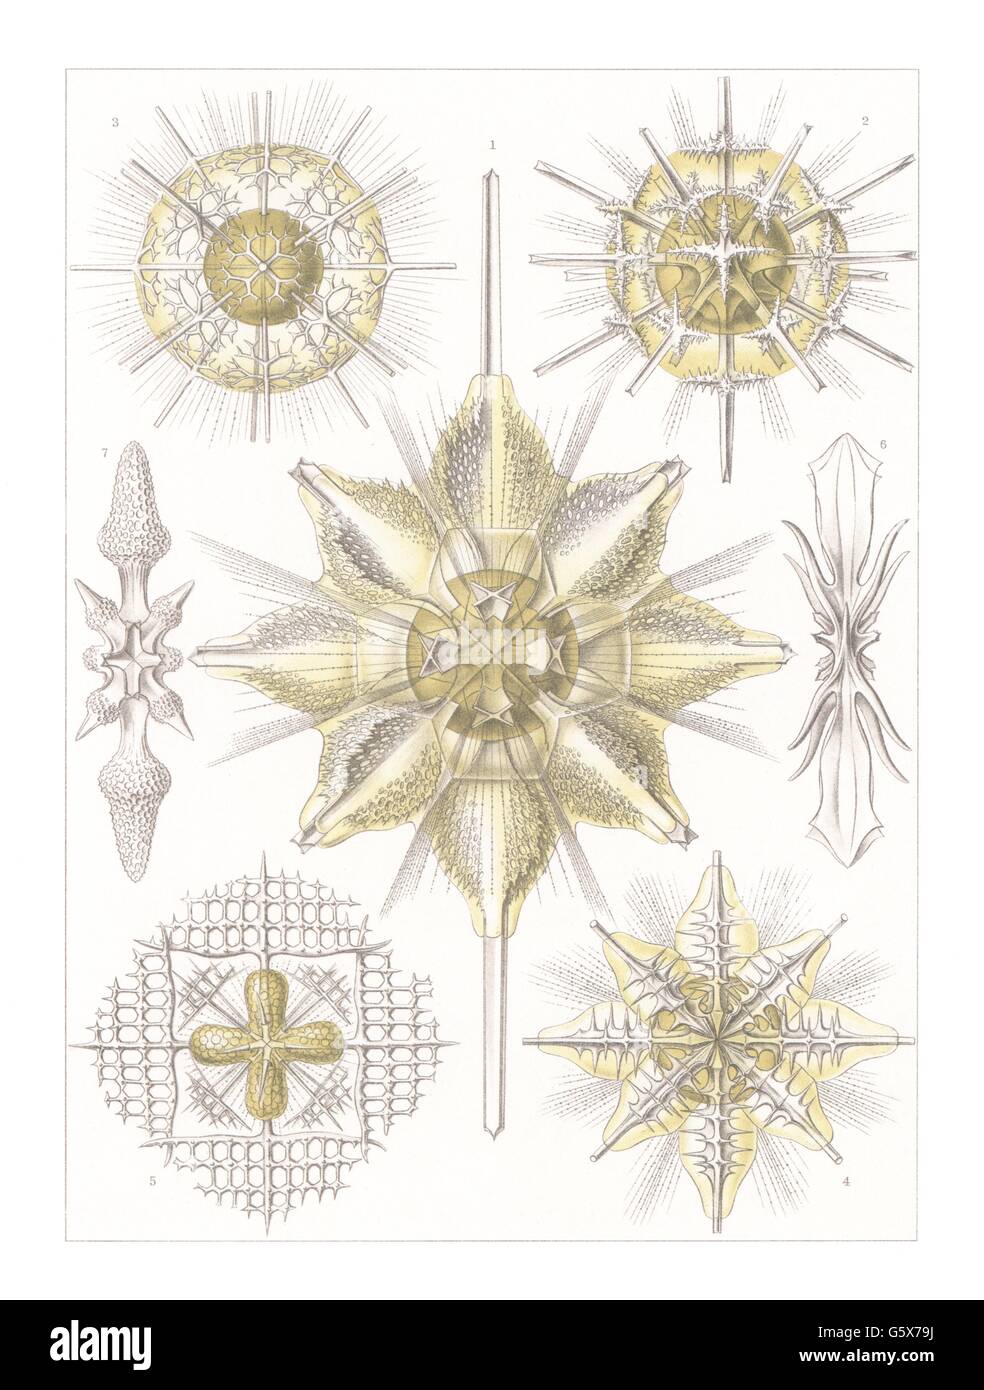 zoologie / Tiere, Acanthometrides (Acanthometra), Farblithographie, aus: Ernst Haeckel, 'Kunstformen der Natur', Leipzig - Wien, 1899 - 1904, Additional-Rights-Clearences-not available Stockfoto